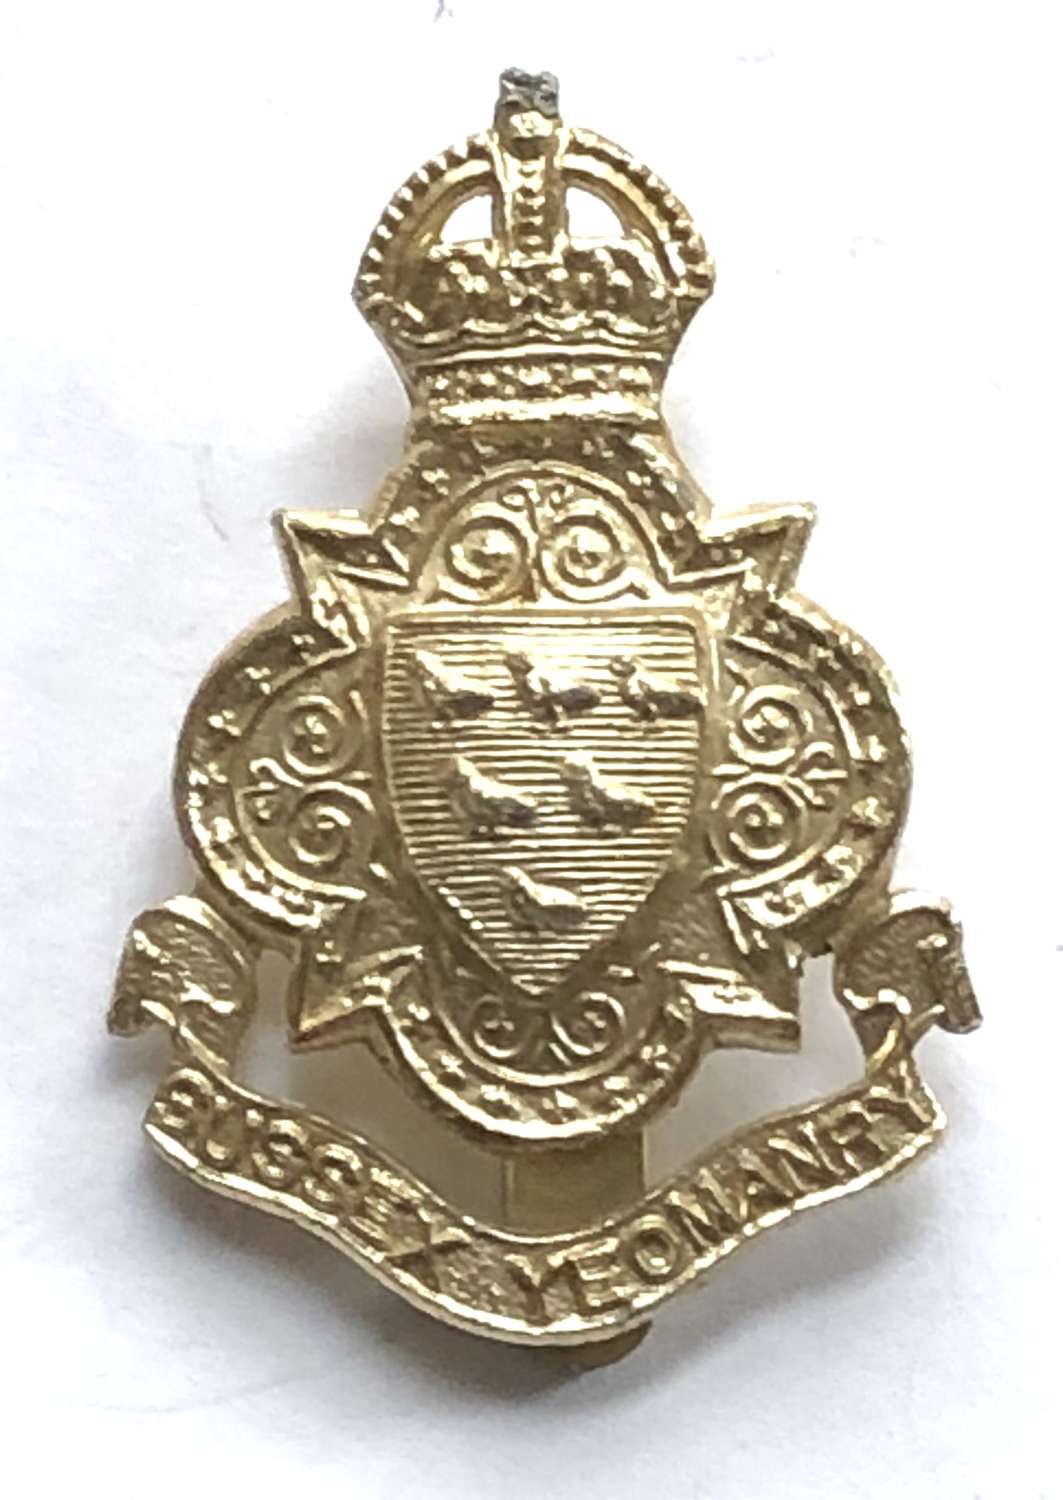 Sussex Yeomanty anodised early 1950's cap badge by JR Gaunt, London